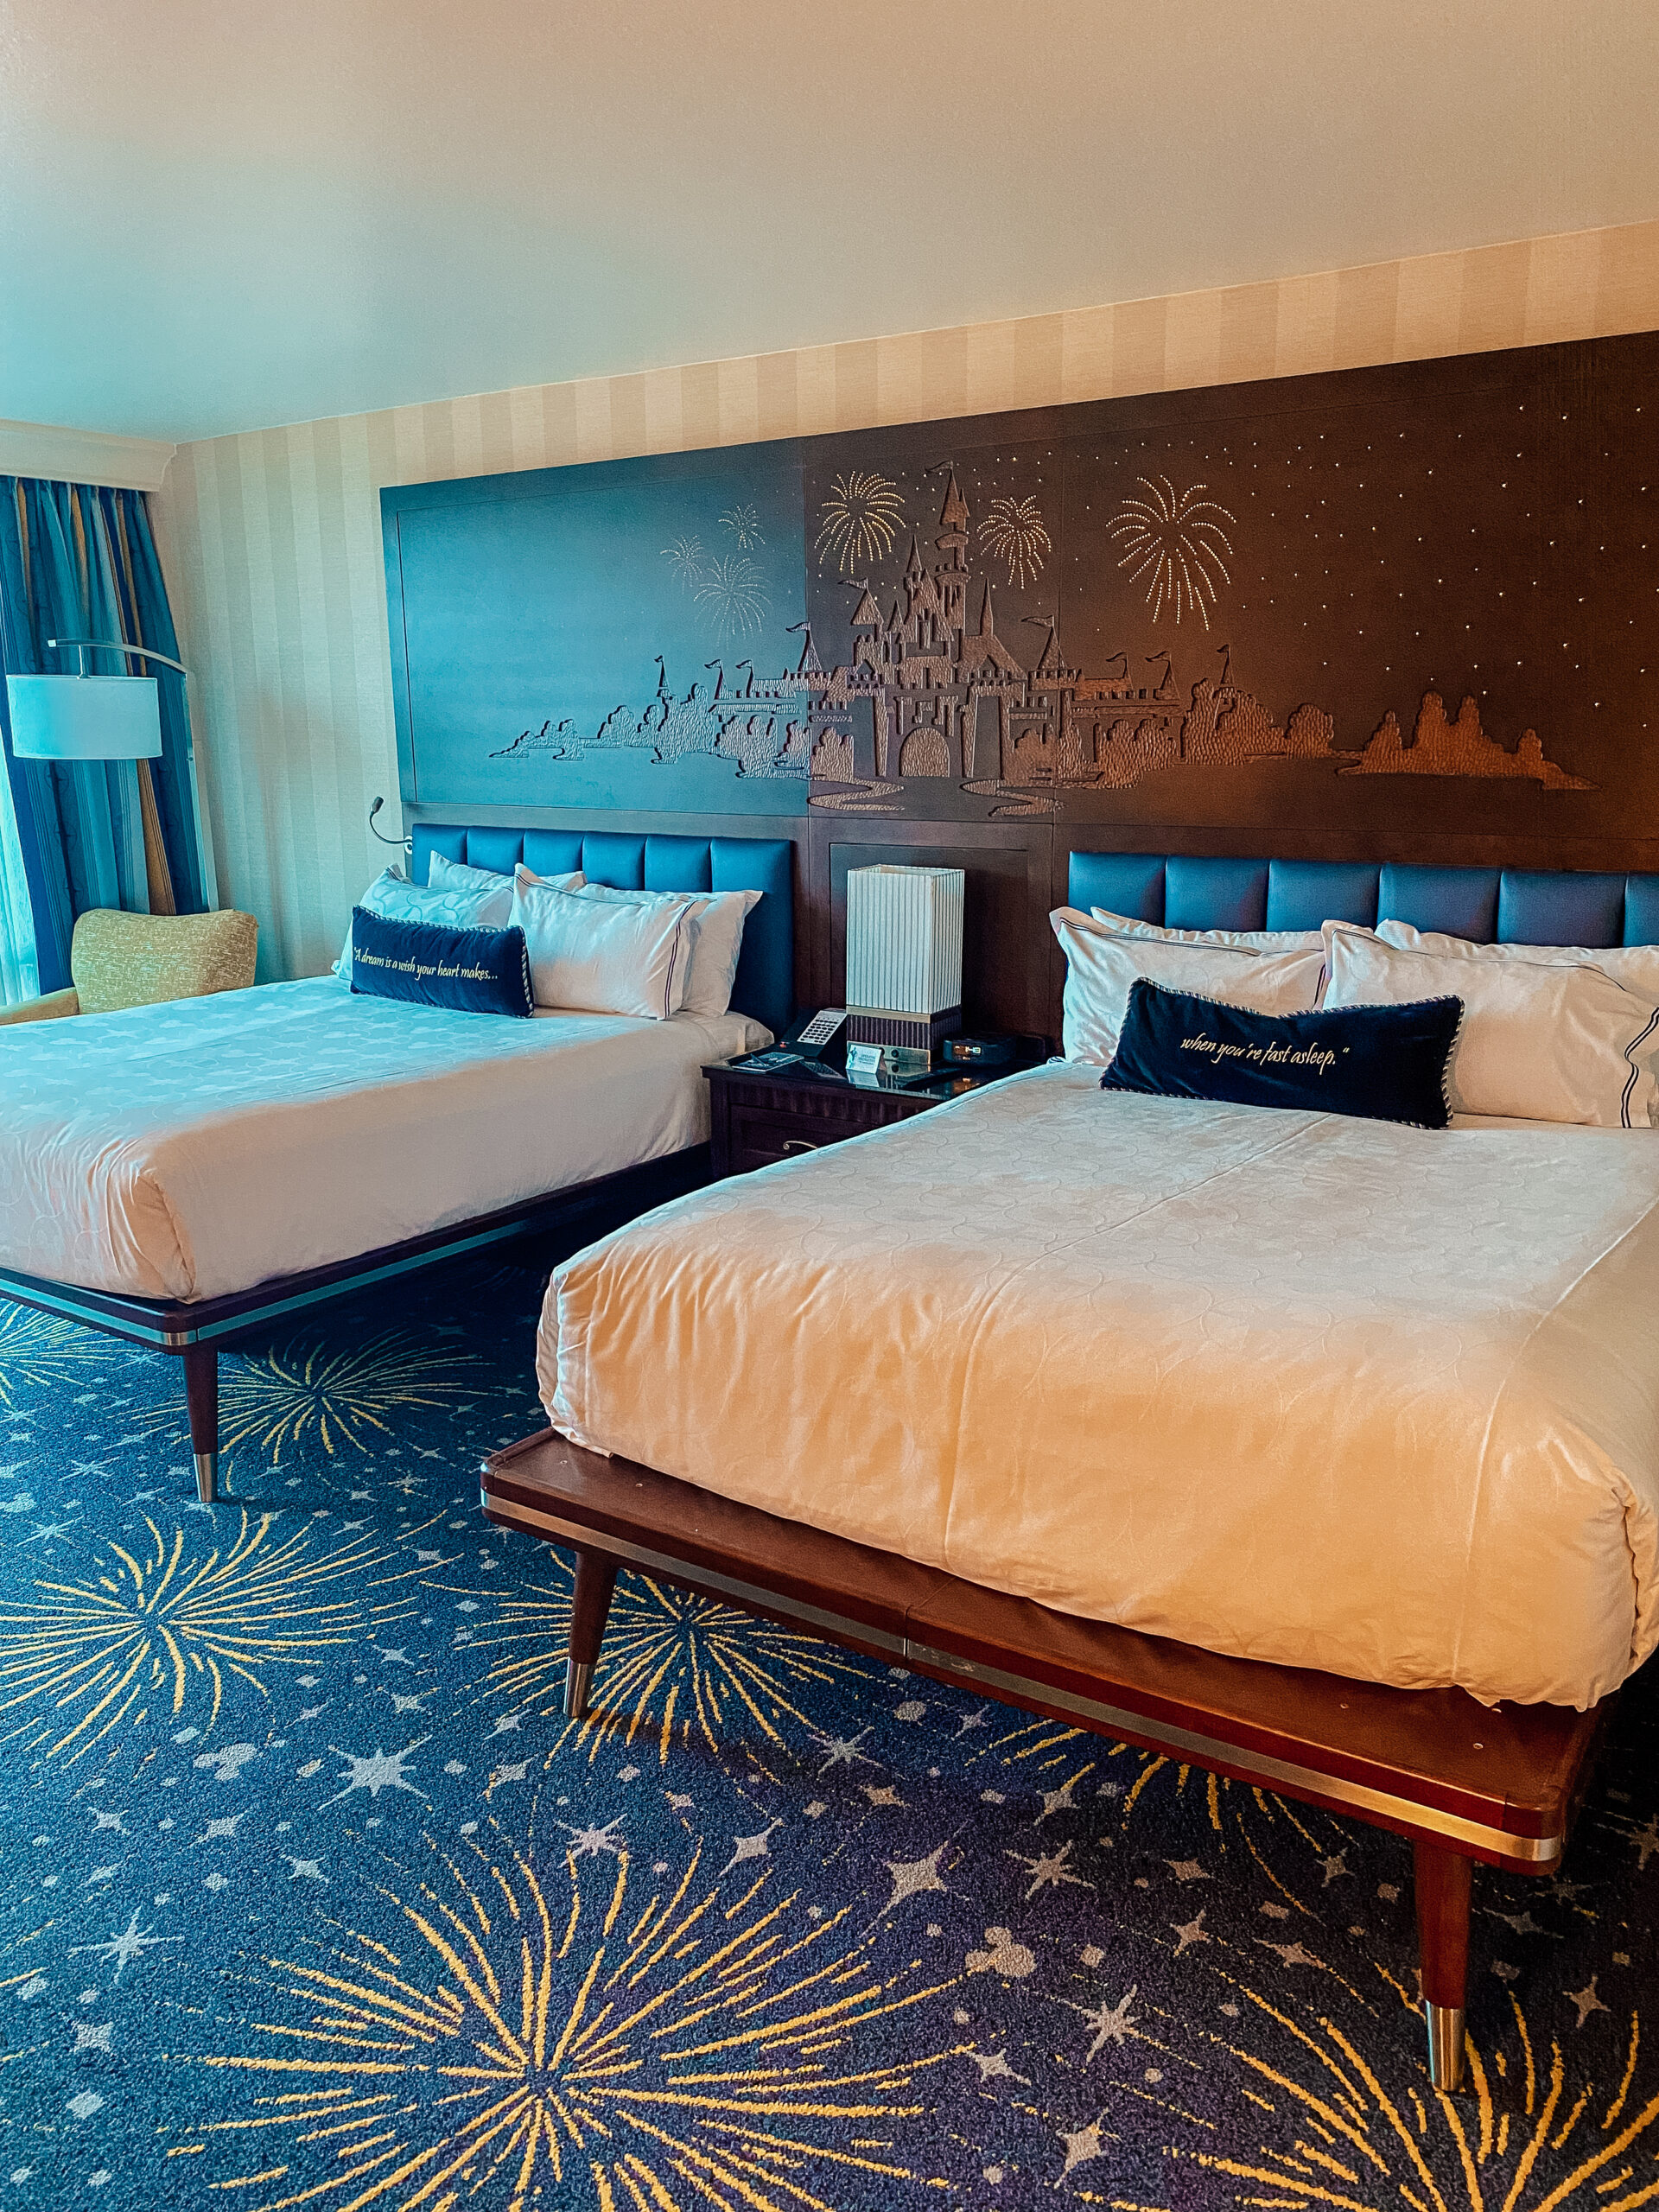 Disneyland Hotel rooms with either 2 queen beds or 1 king bed.